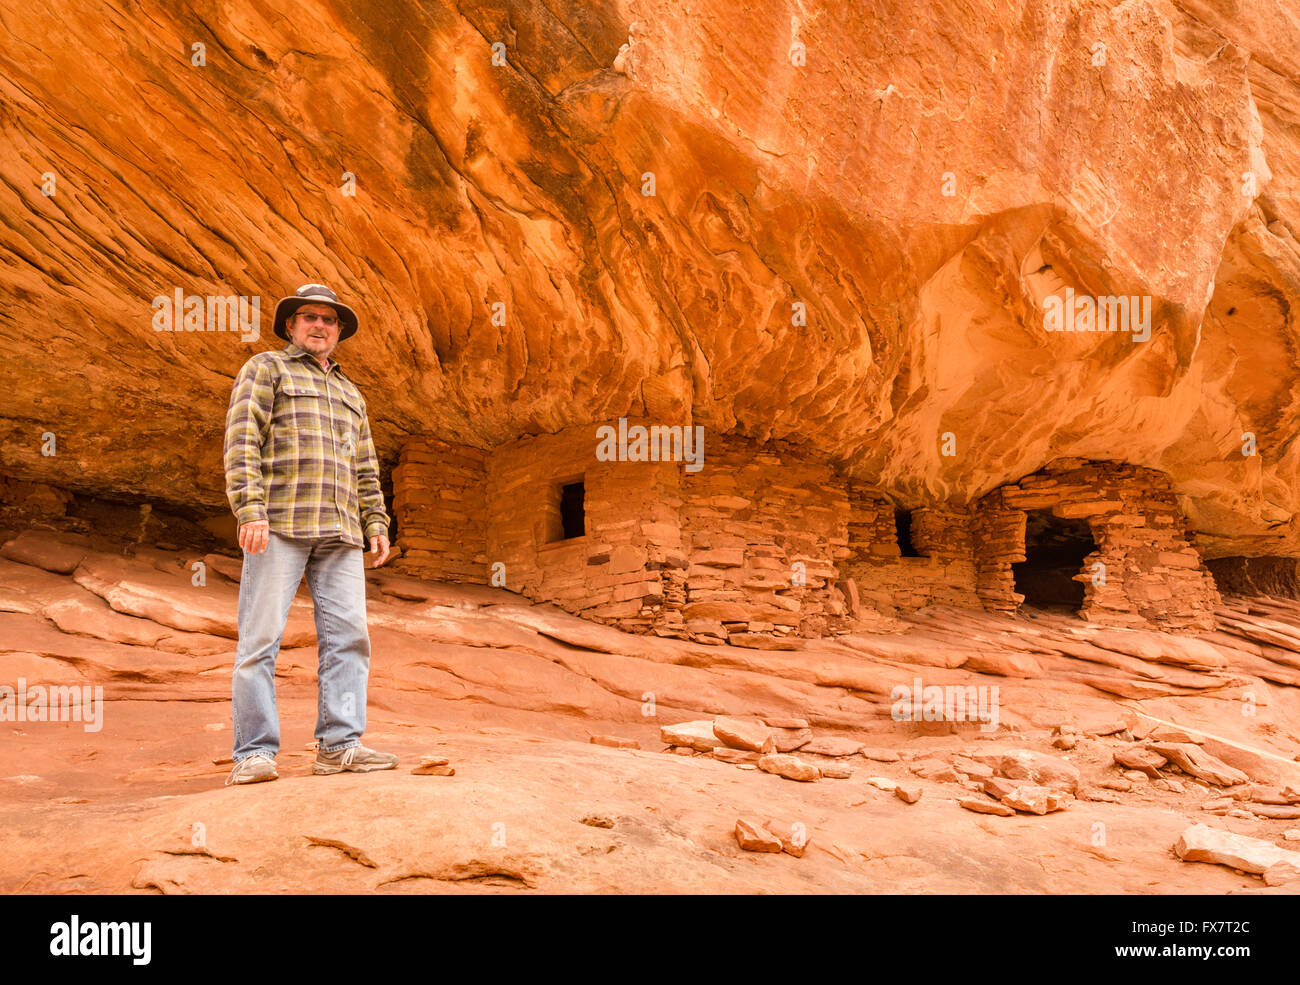 House on Fire, Puebloan cliff dwelling in Mule Canyon on Cedar Mesa, Shash Jaa Unit, Bears Ears National Monument, Utah, USA Stock Photo